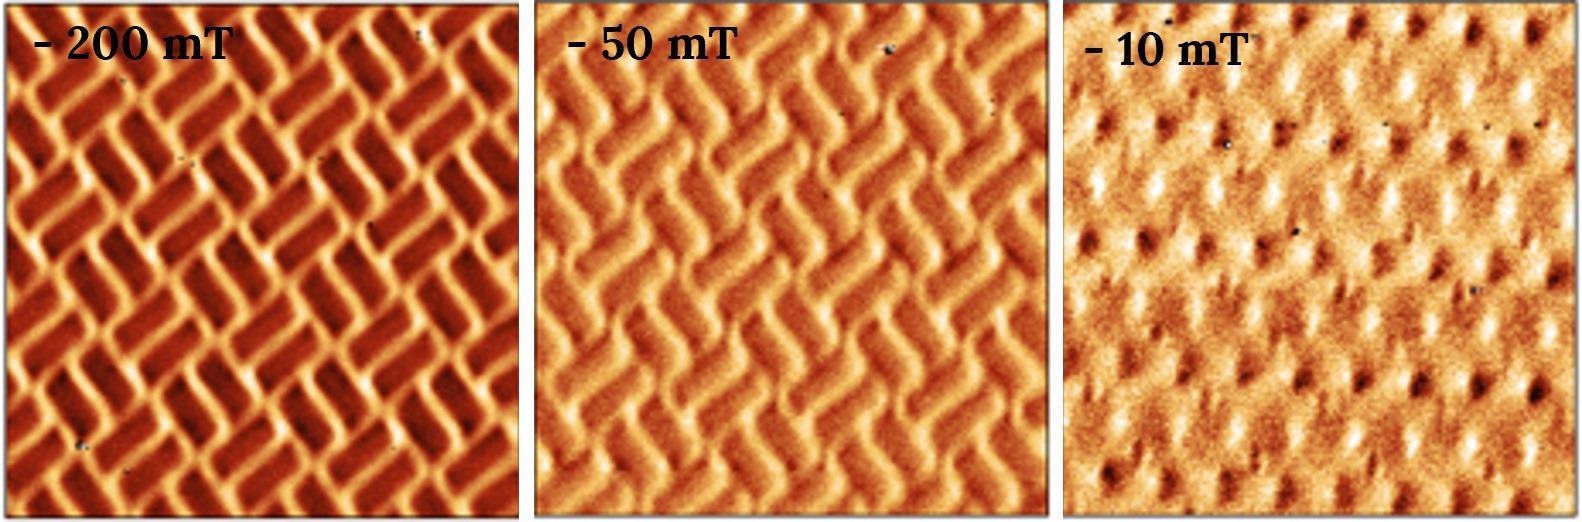 MFM images (5 x 5 µm2) of Shakti spin ice structure made at different magnetic fields imaged using the variable magnetic field sample holder using the CoreAFM.